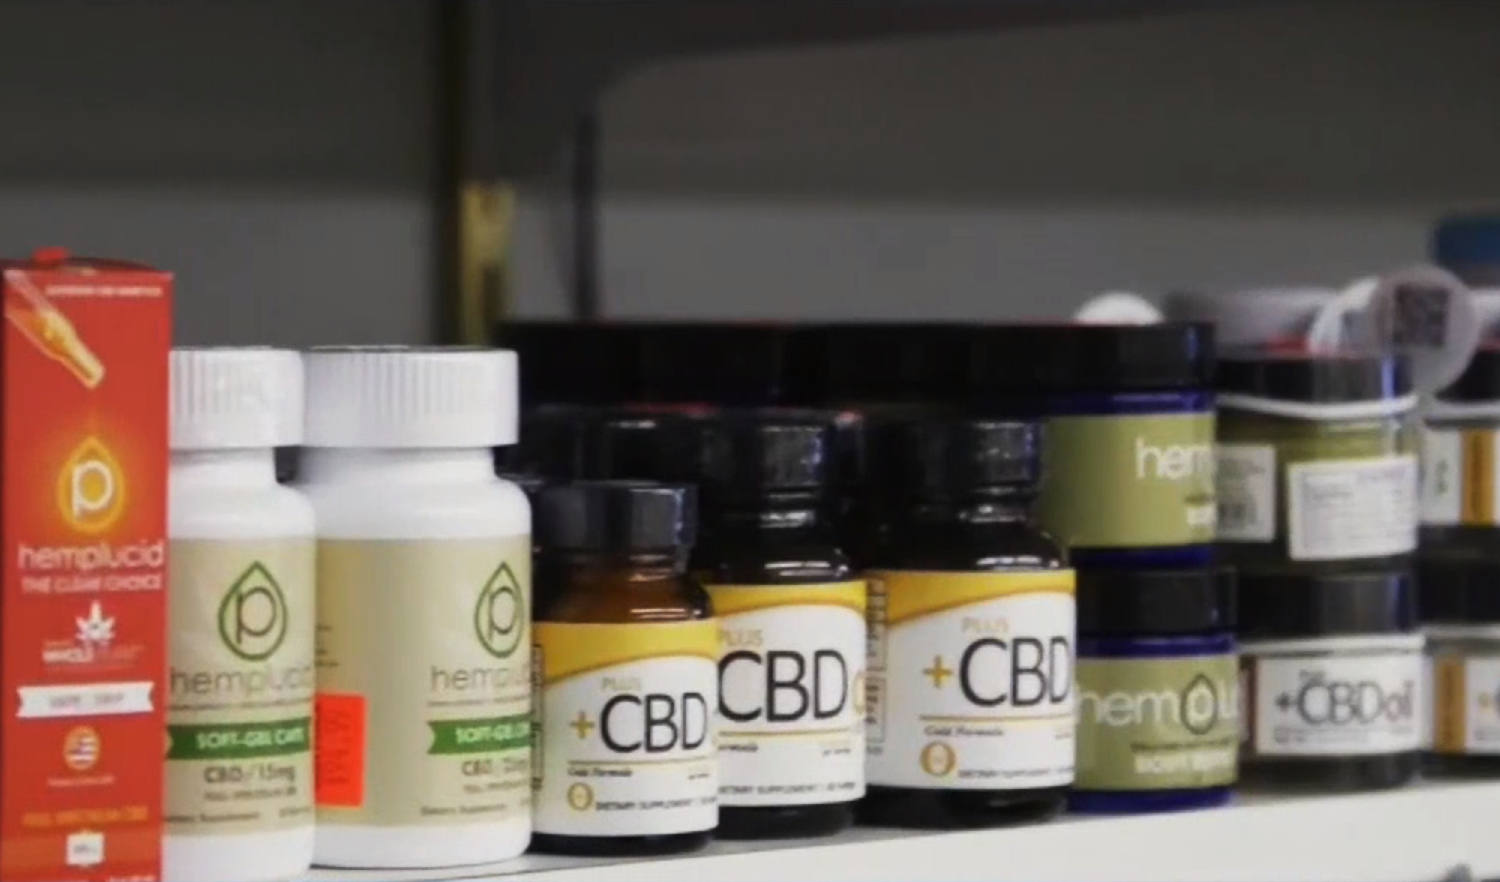 Clearing Up The Confusion About CBD